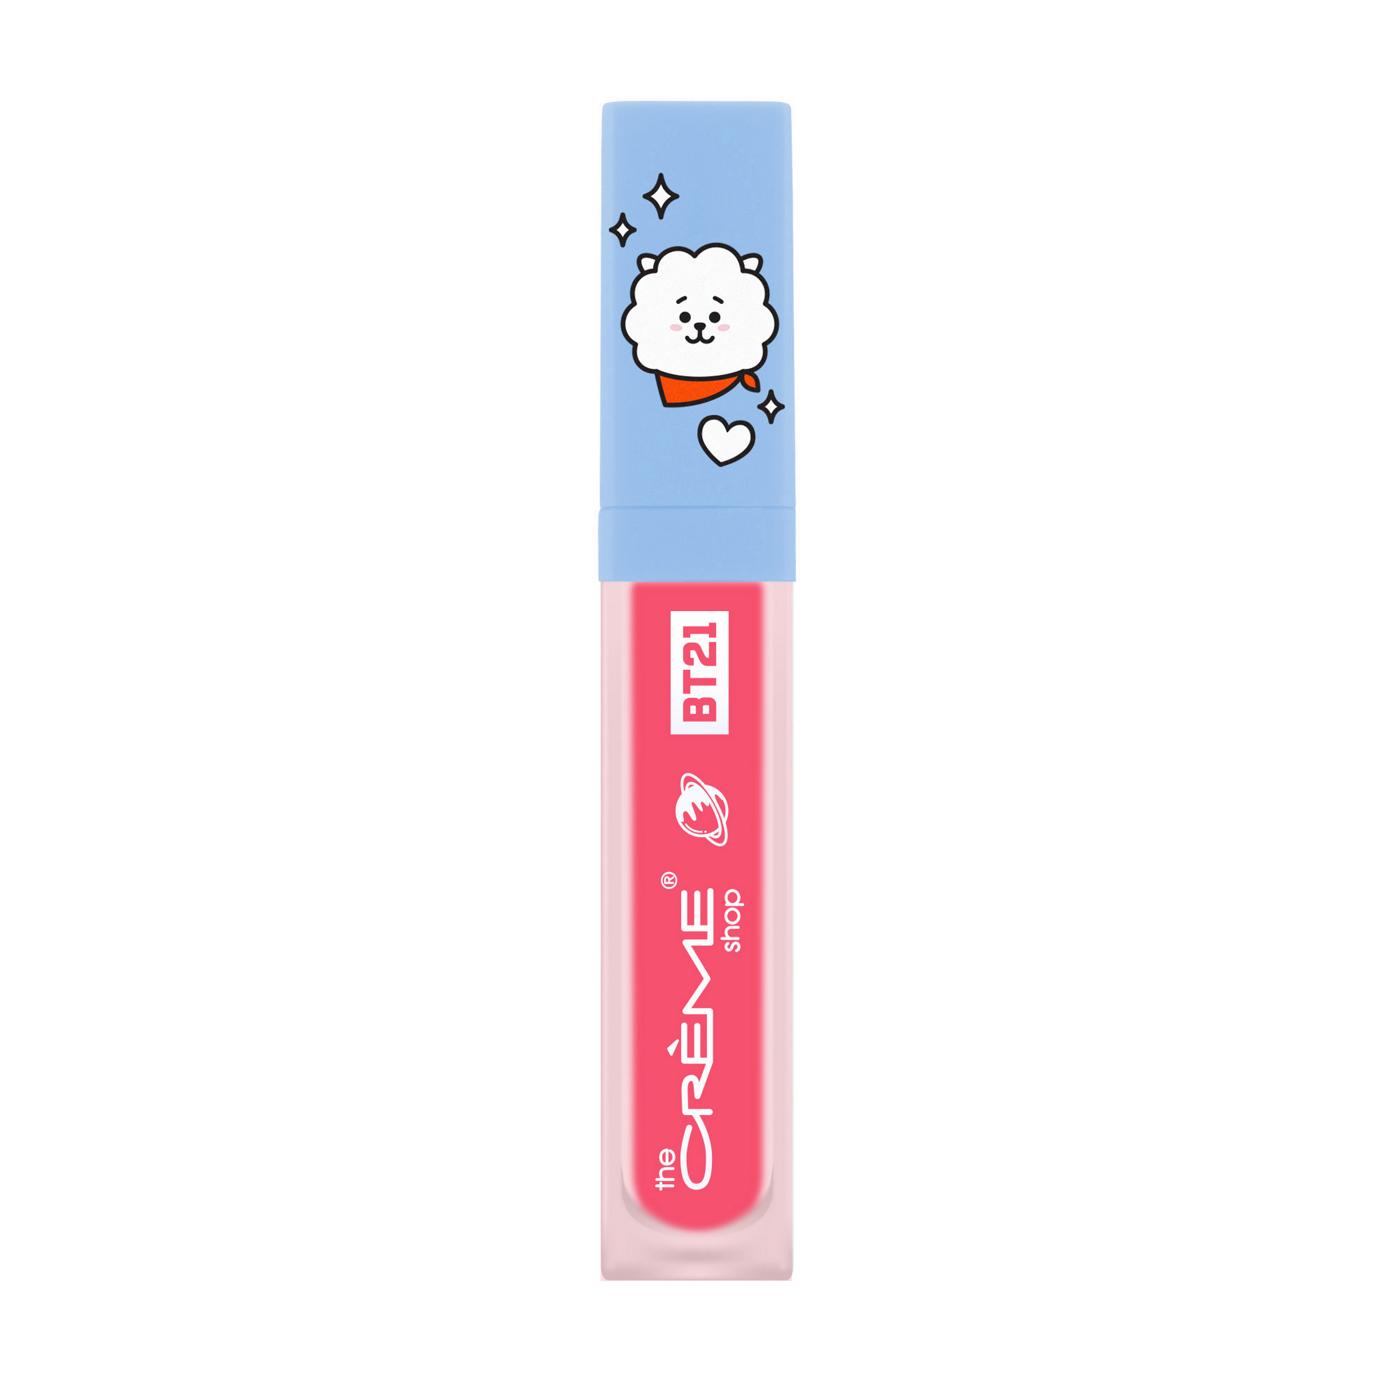 The Crème Shop Universtain Lip Tint Pink Puff; image 2 of 3